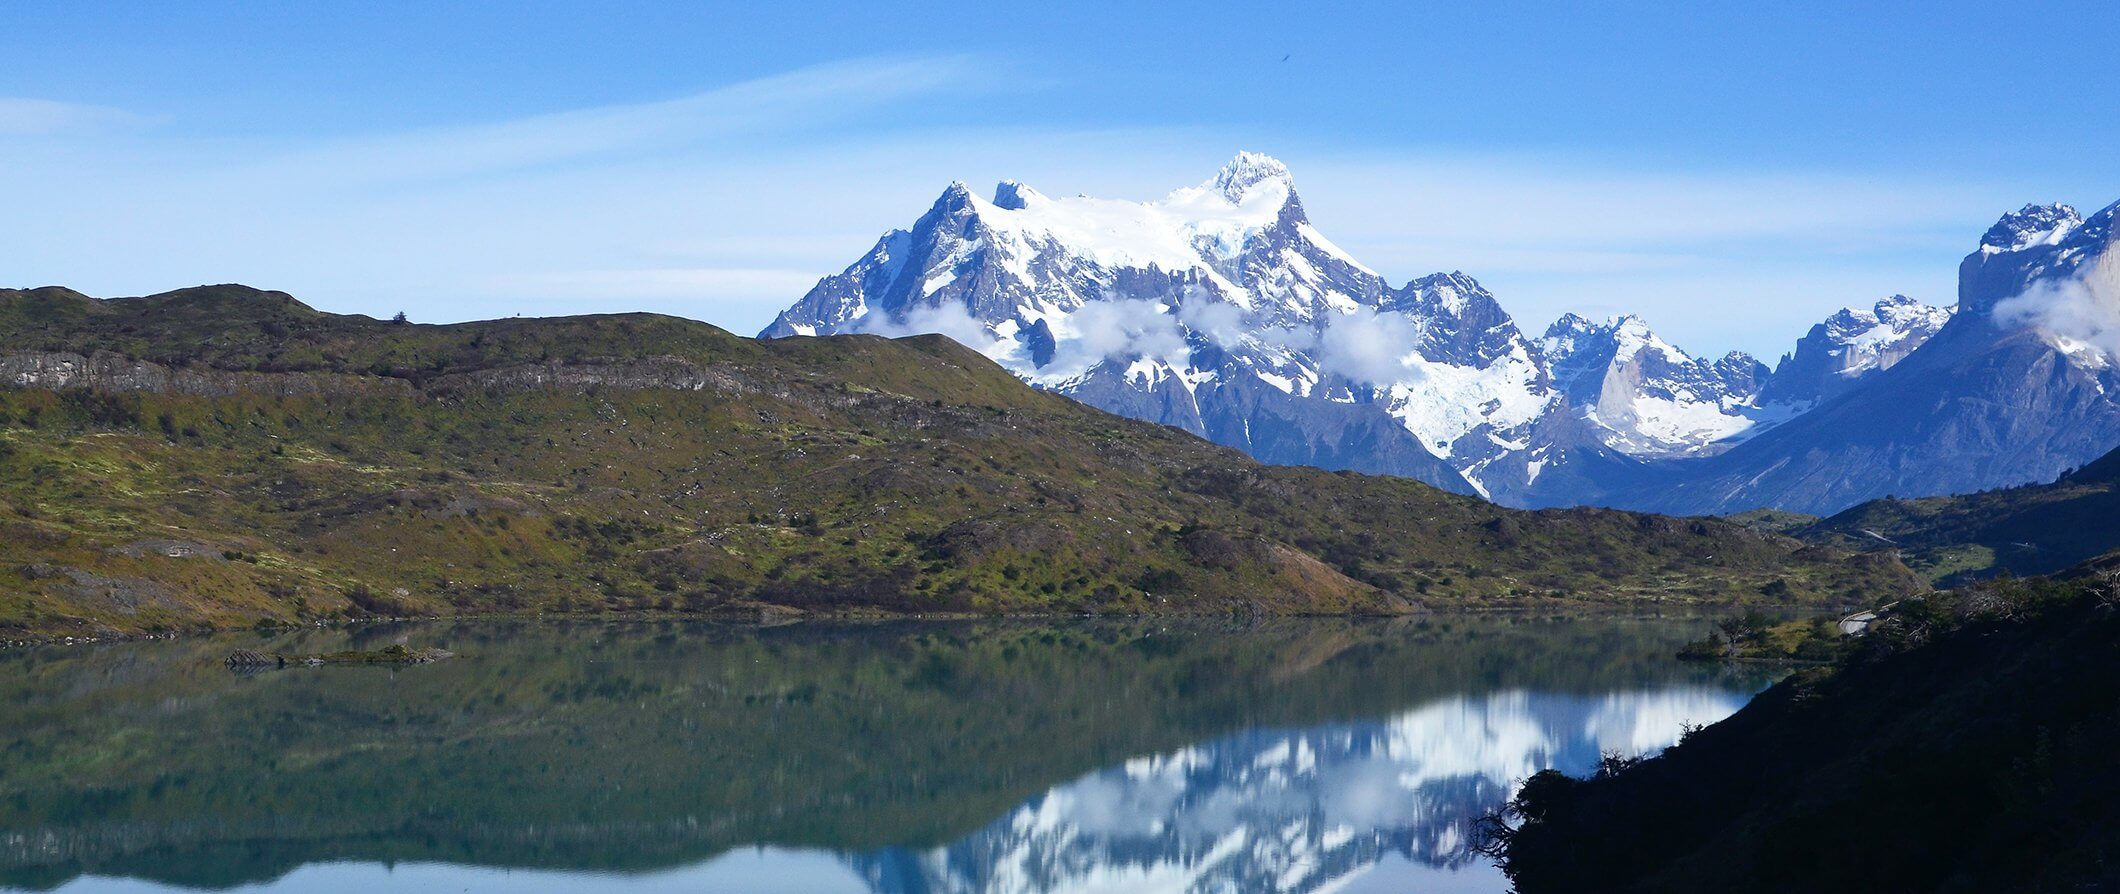 scenic view of Chile. Snow caped mountains in Chile overlooking a lake